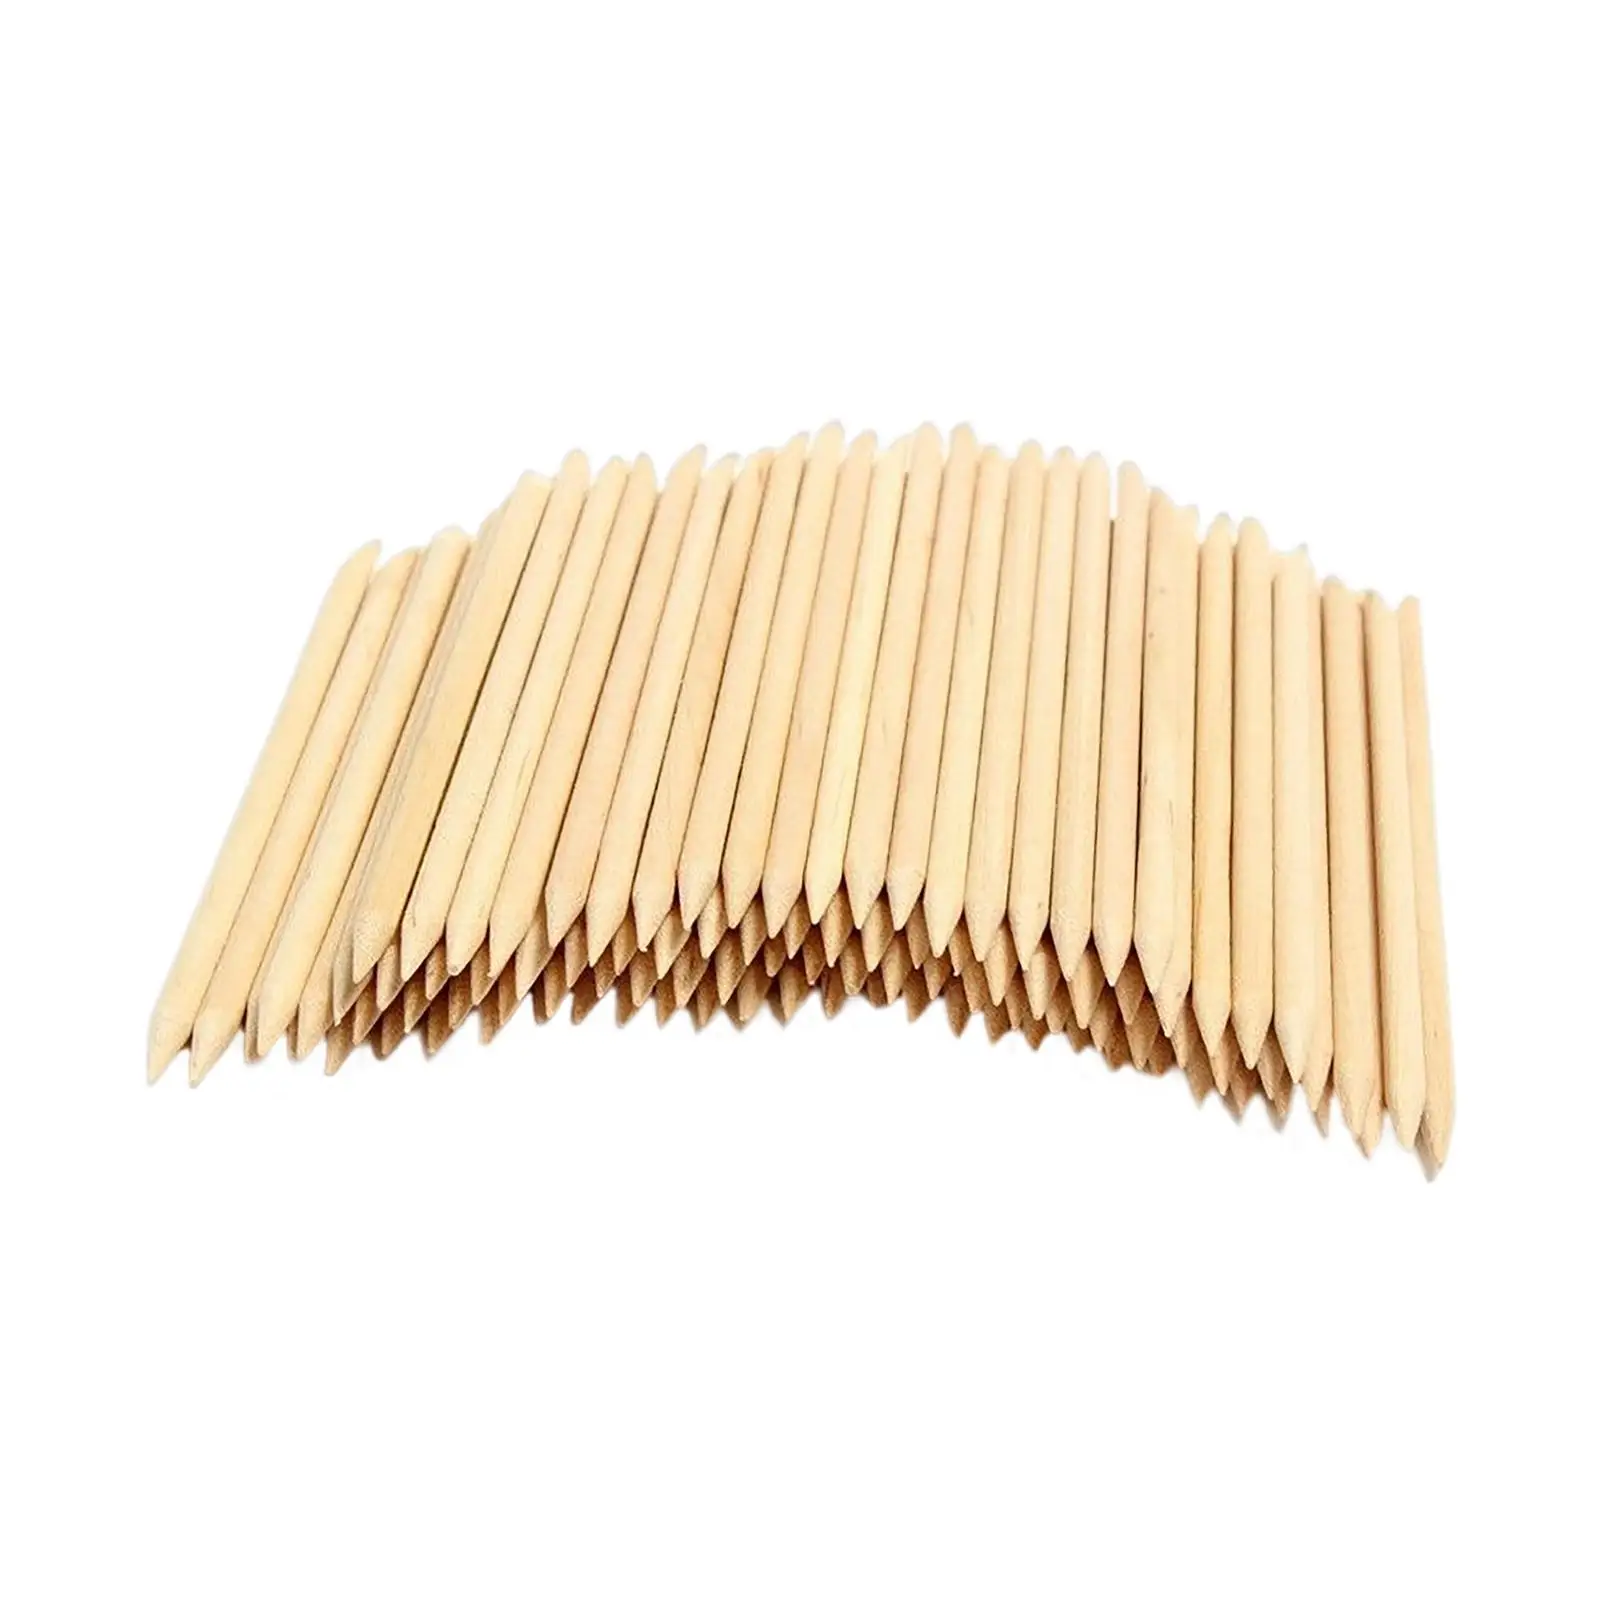 100x Orange Wooden Sticks, Manicure Supplies Nail Cuticle Pusher, for Nails Everyday Use